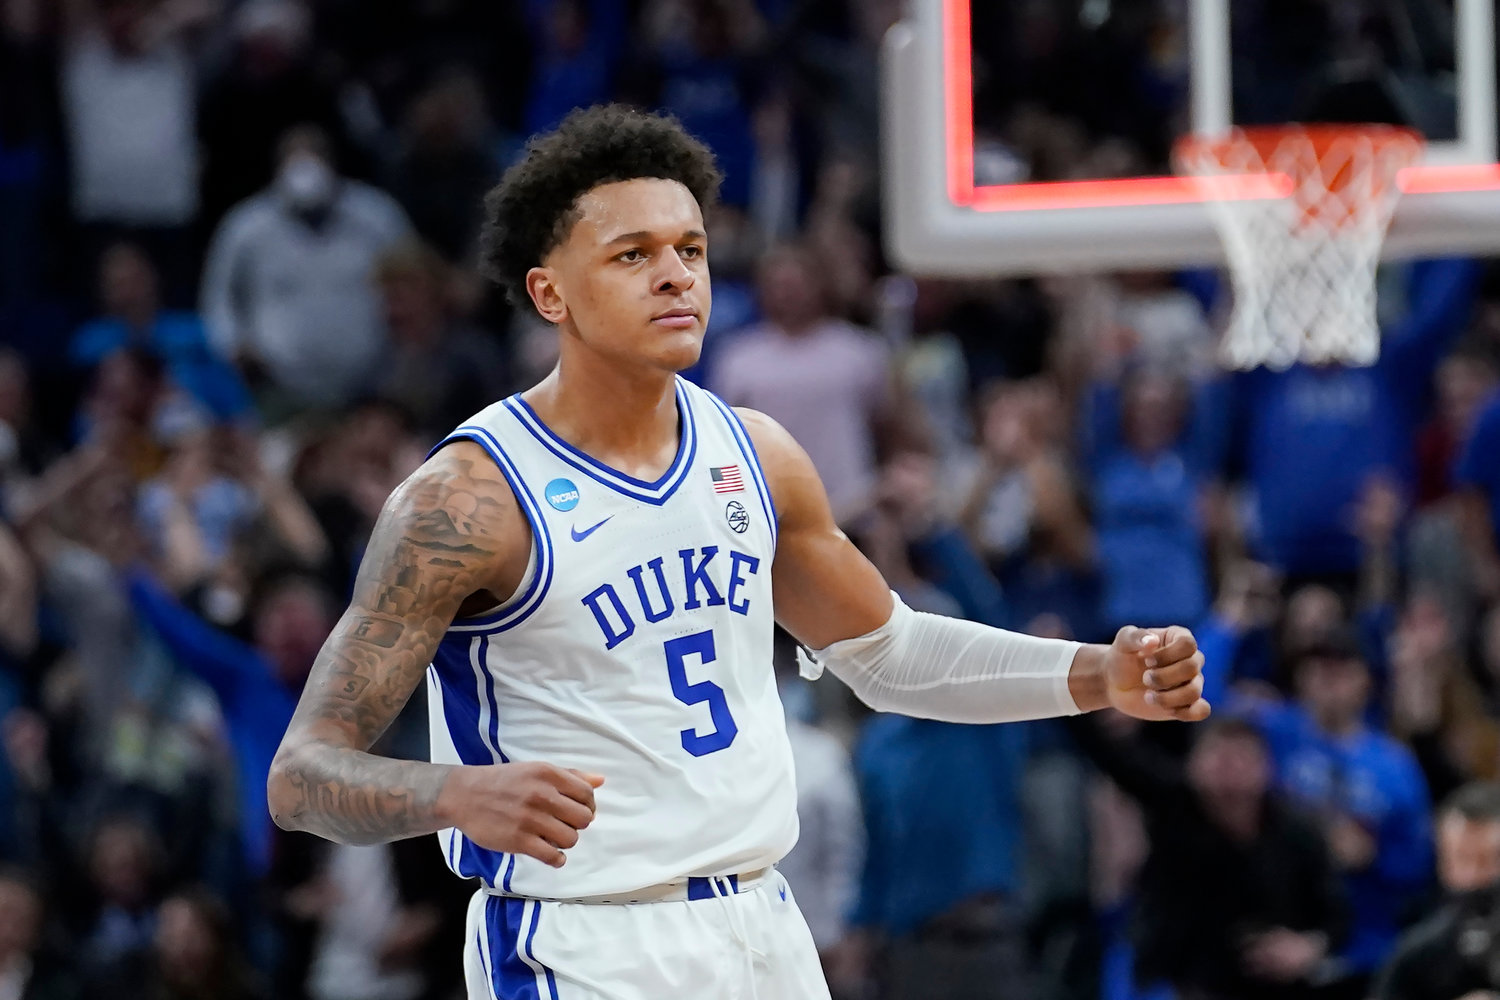 FILE - Duke forward Paolo Banchero (5) celebrates during the first half of the team's game against Arkansas in the NCAA men's basketball tournament in San Francisco, March 26, 2022. Banchero is one of the top forwards in the upcoming NBA draft. (AP Photo/Marcio Jose Sanchez, File)